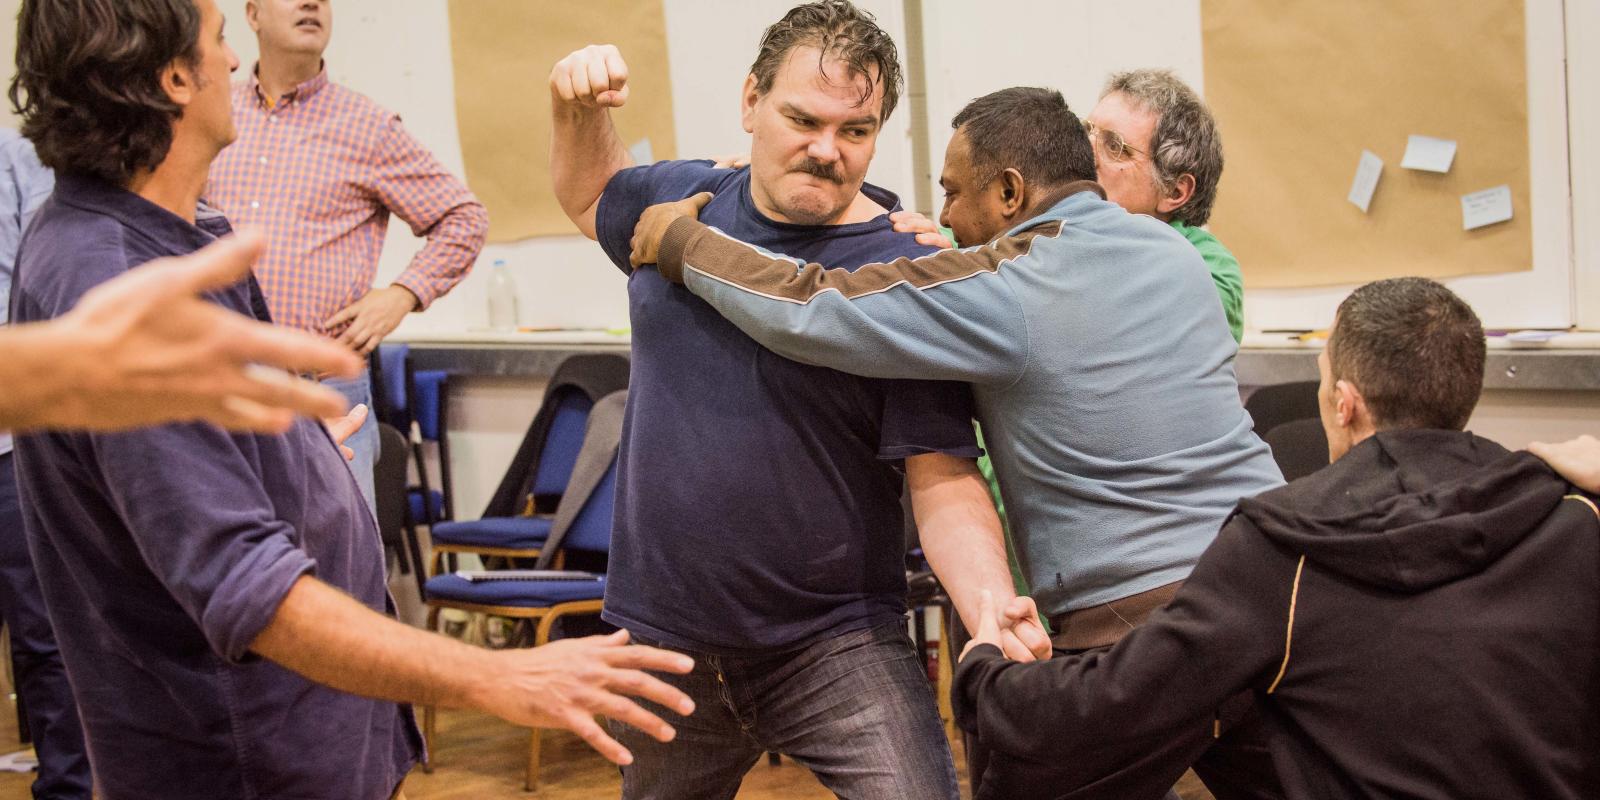 Man throwing fist being held back during rehearsals for the Don Giovanni project